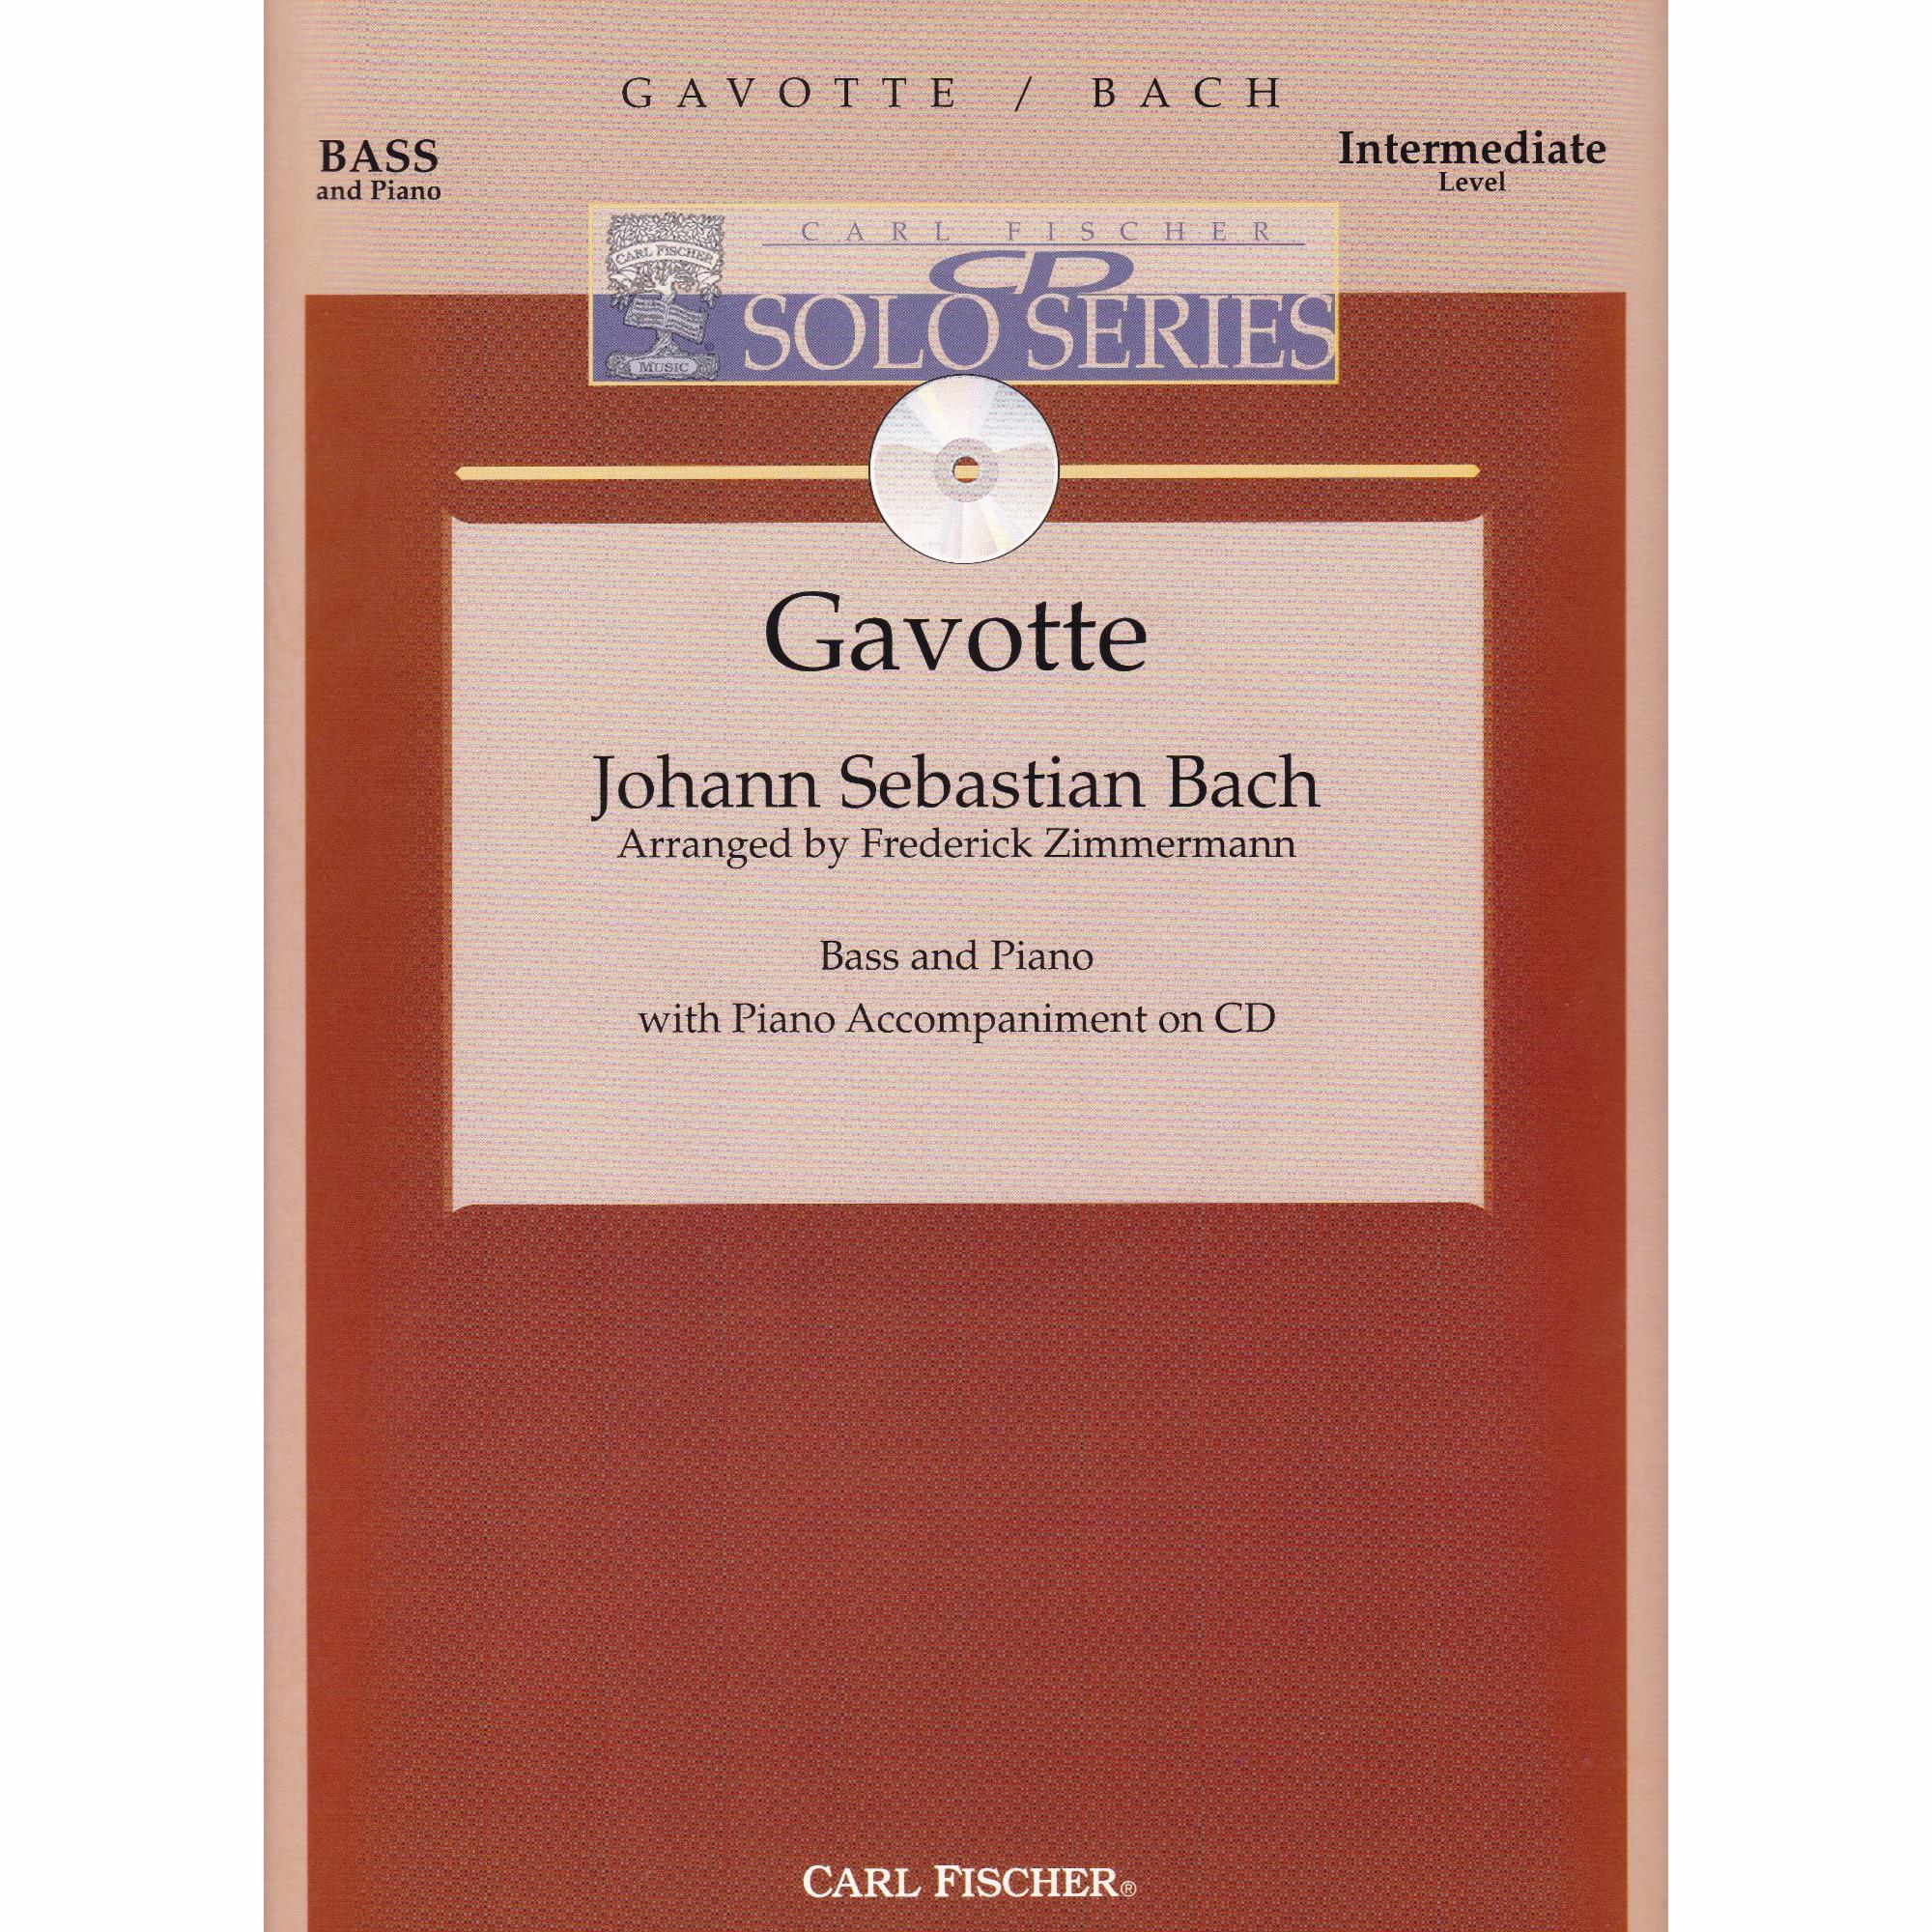 Gavotte for Bass and Piano